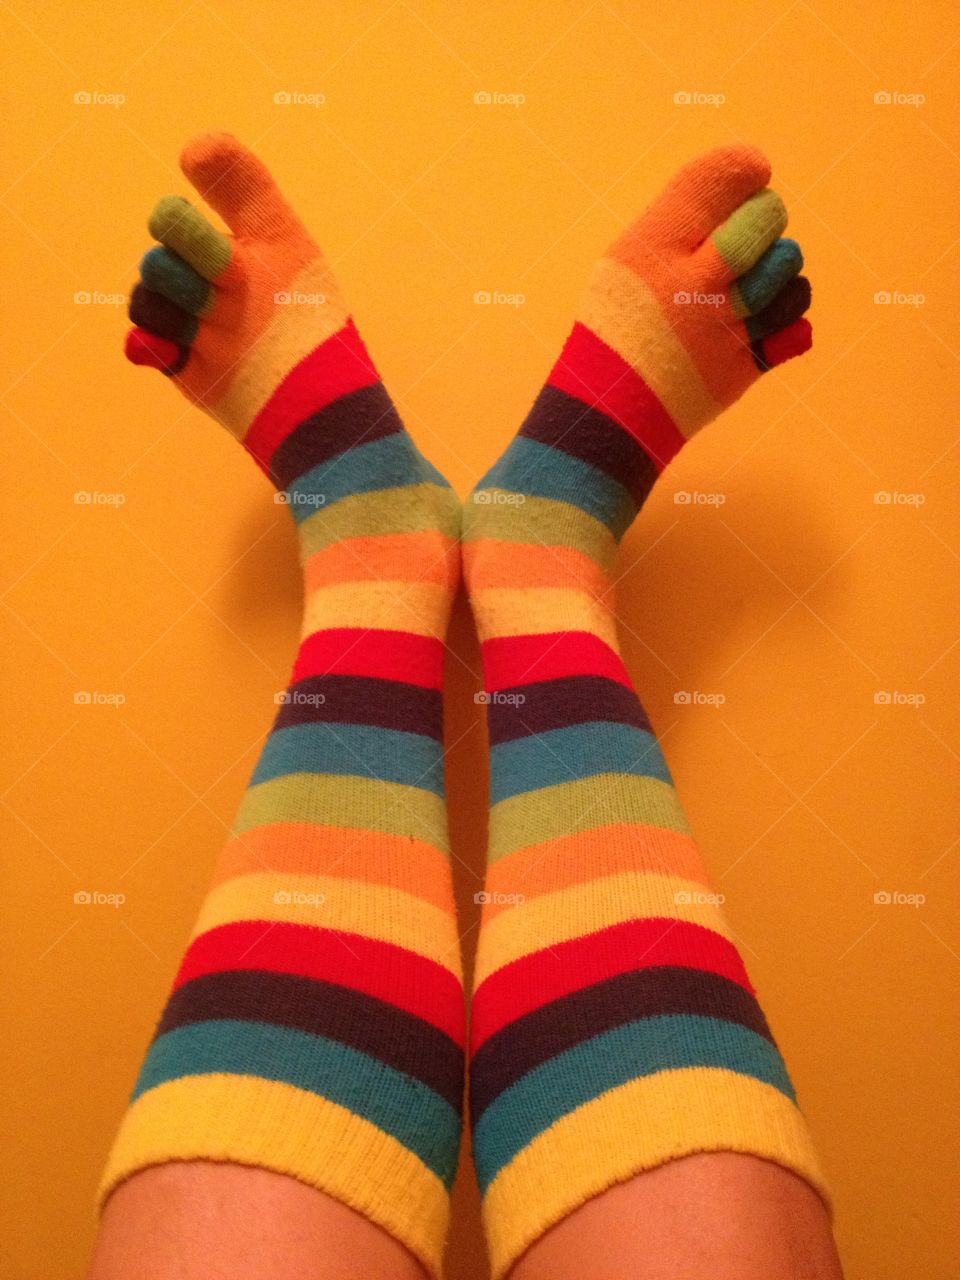 stripey toe socks. putting your feet up on the wall in comfy toe socks